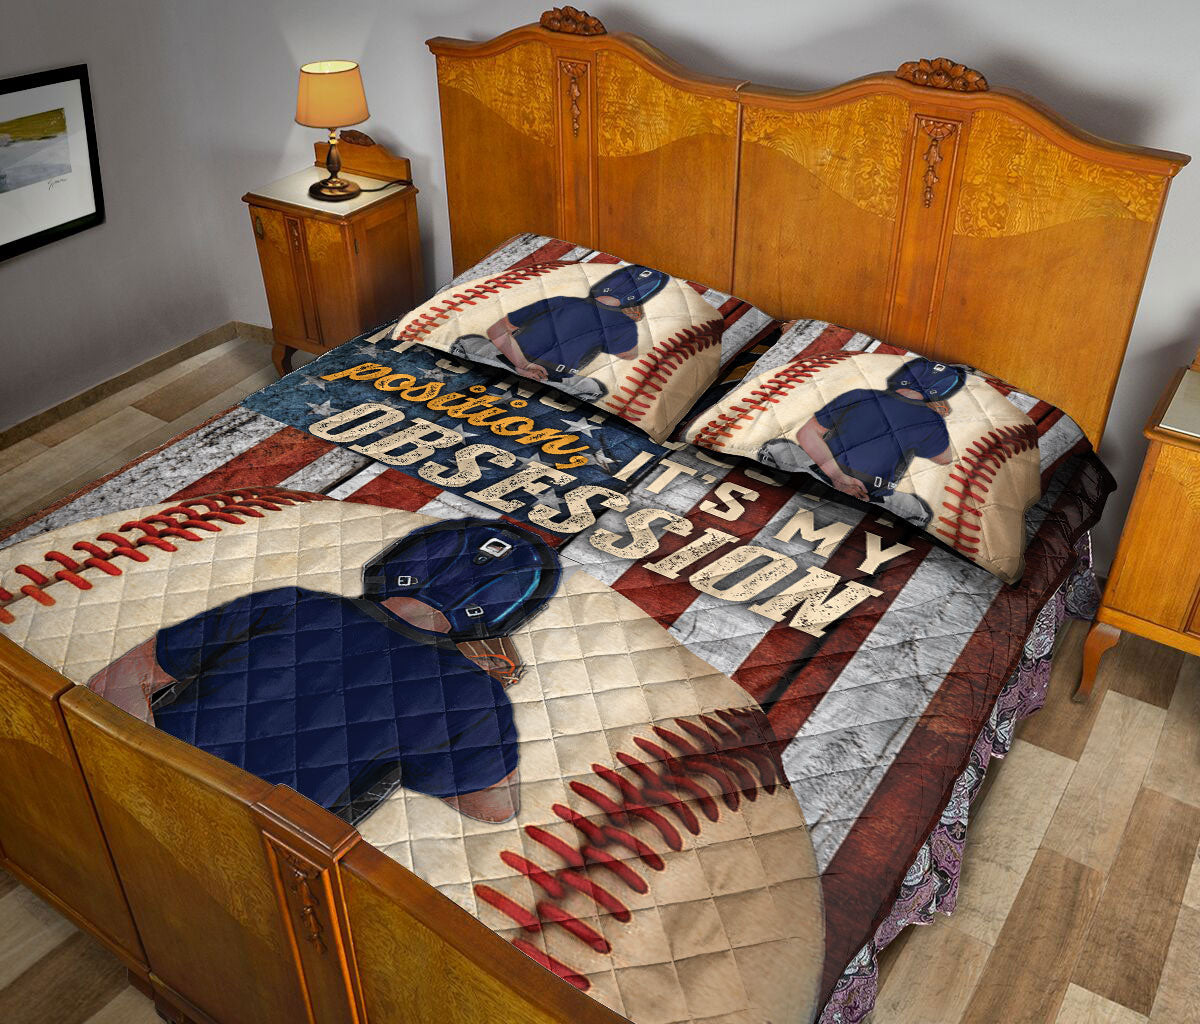 Ohaprints-Quilt-Bed-Set-Pillowcase-Baseball-Player-Catcher-It'S-My-Obsession-American-Flag-Gift-For-Sports-Lover-Blanket-Bedspread-Bedding-699-Queen (80'' x 90'')